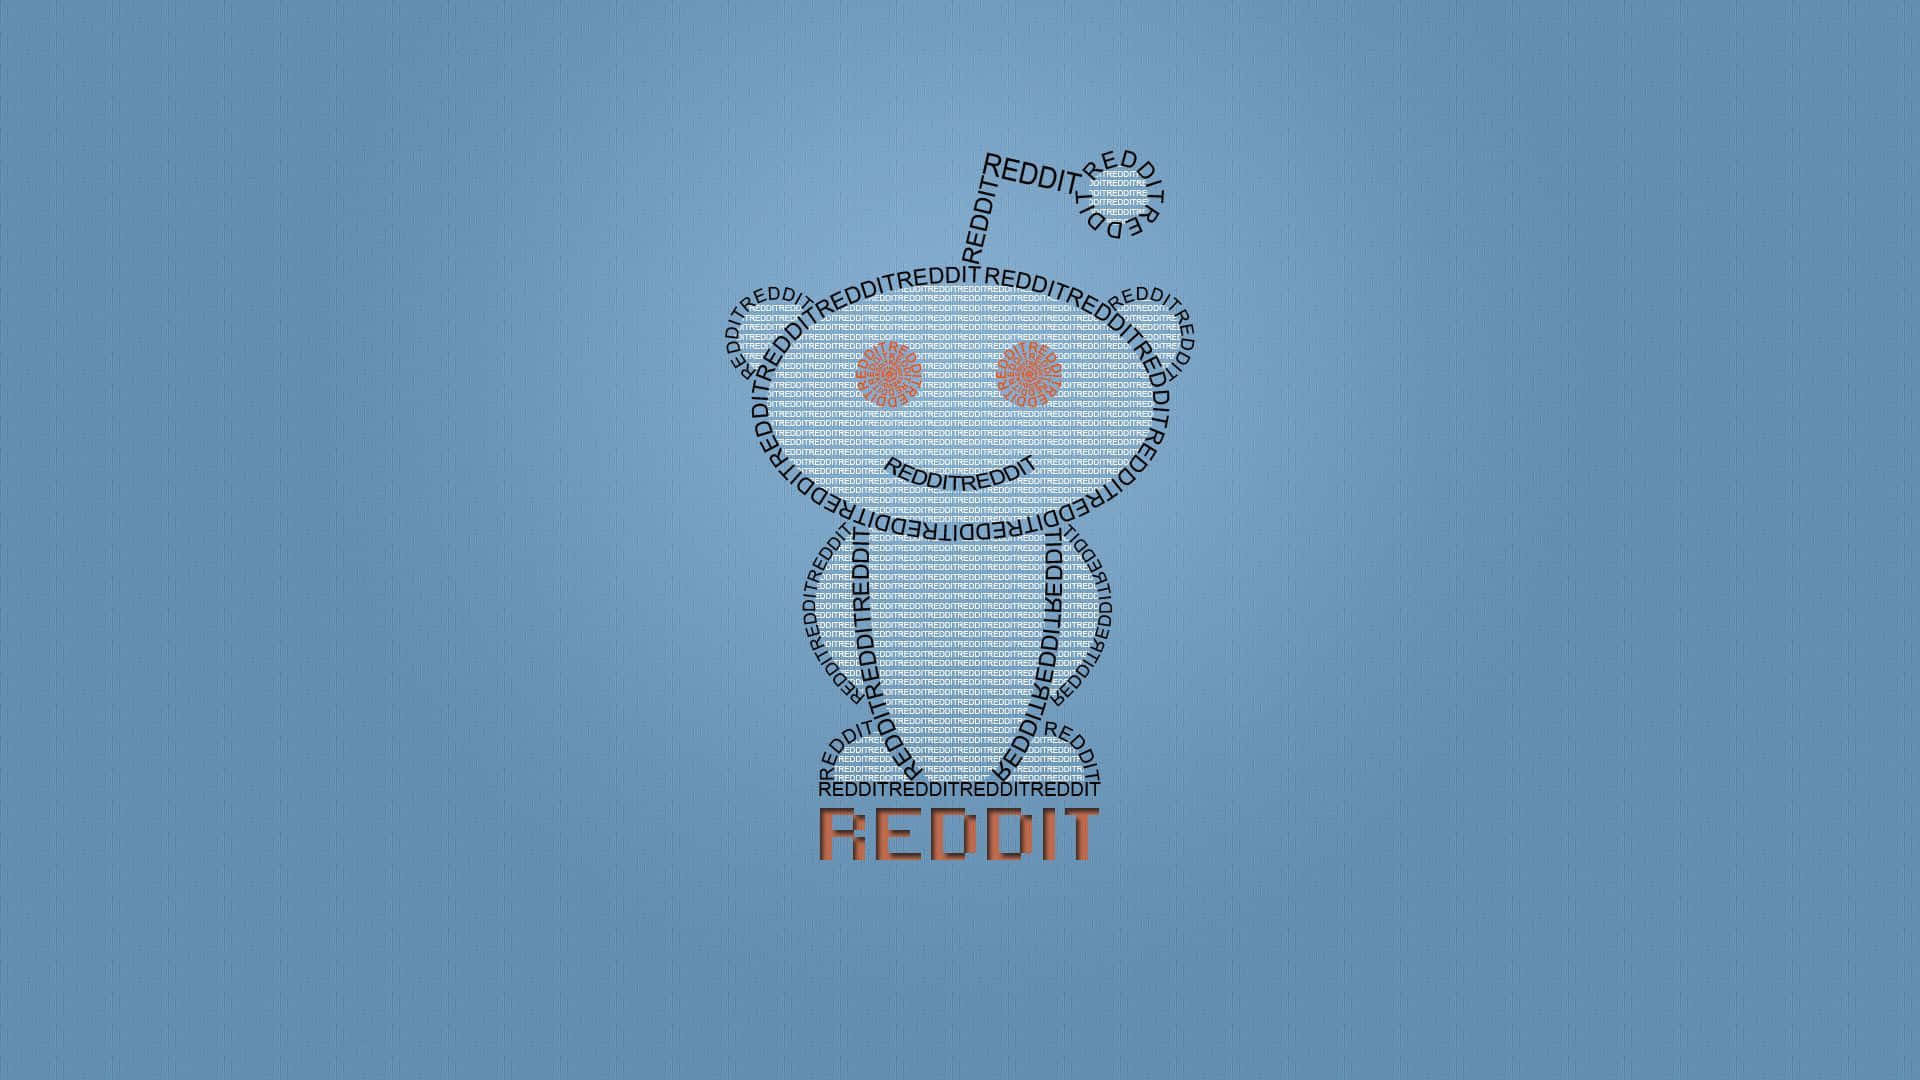 Reddit--A Place for Information and Endless Debate